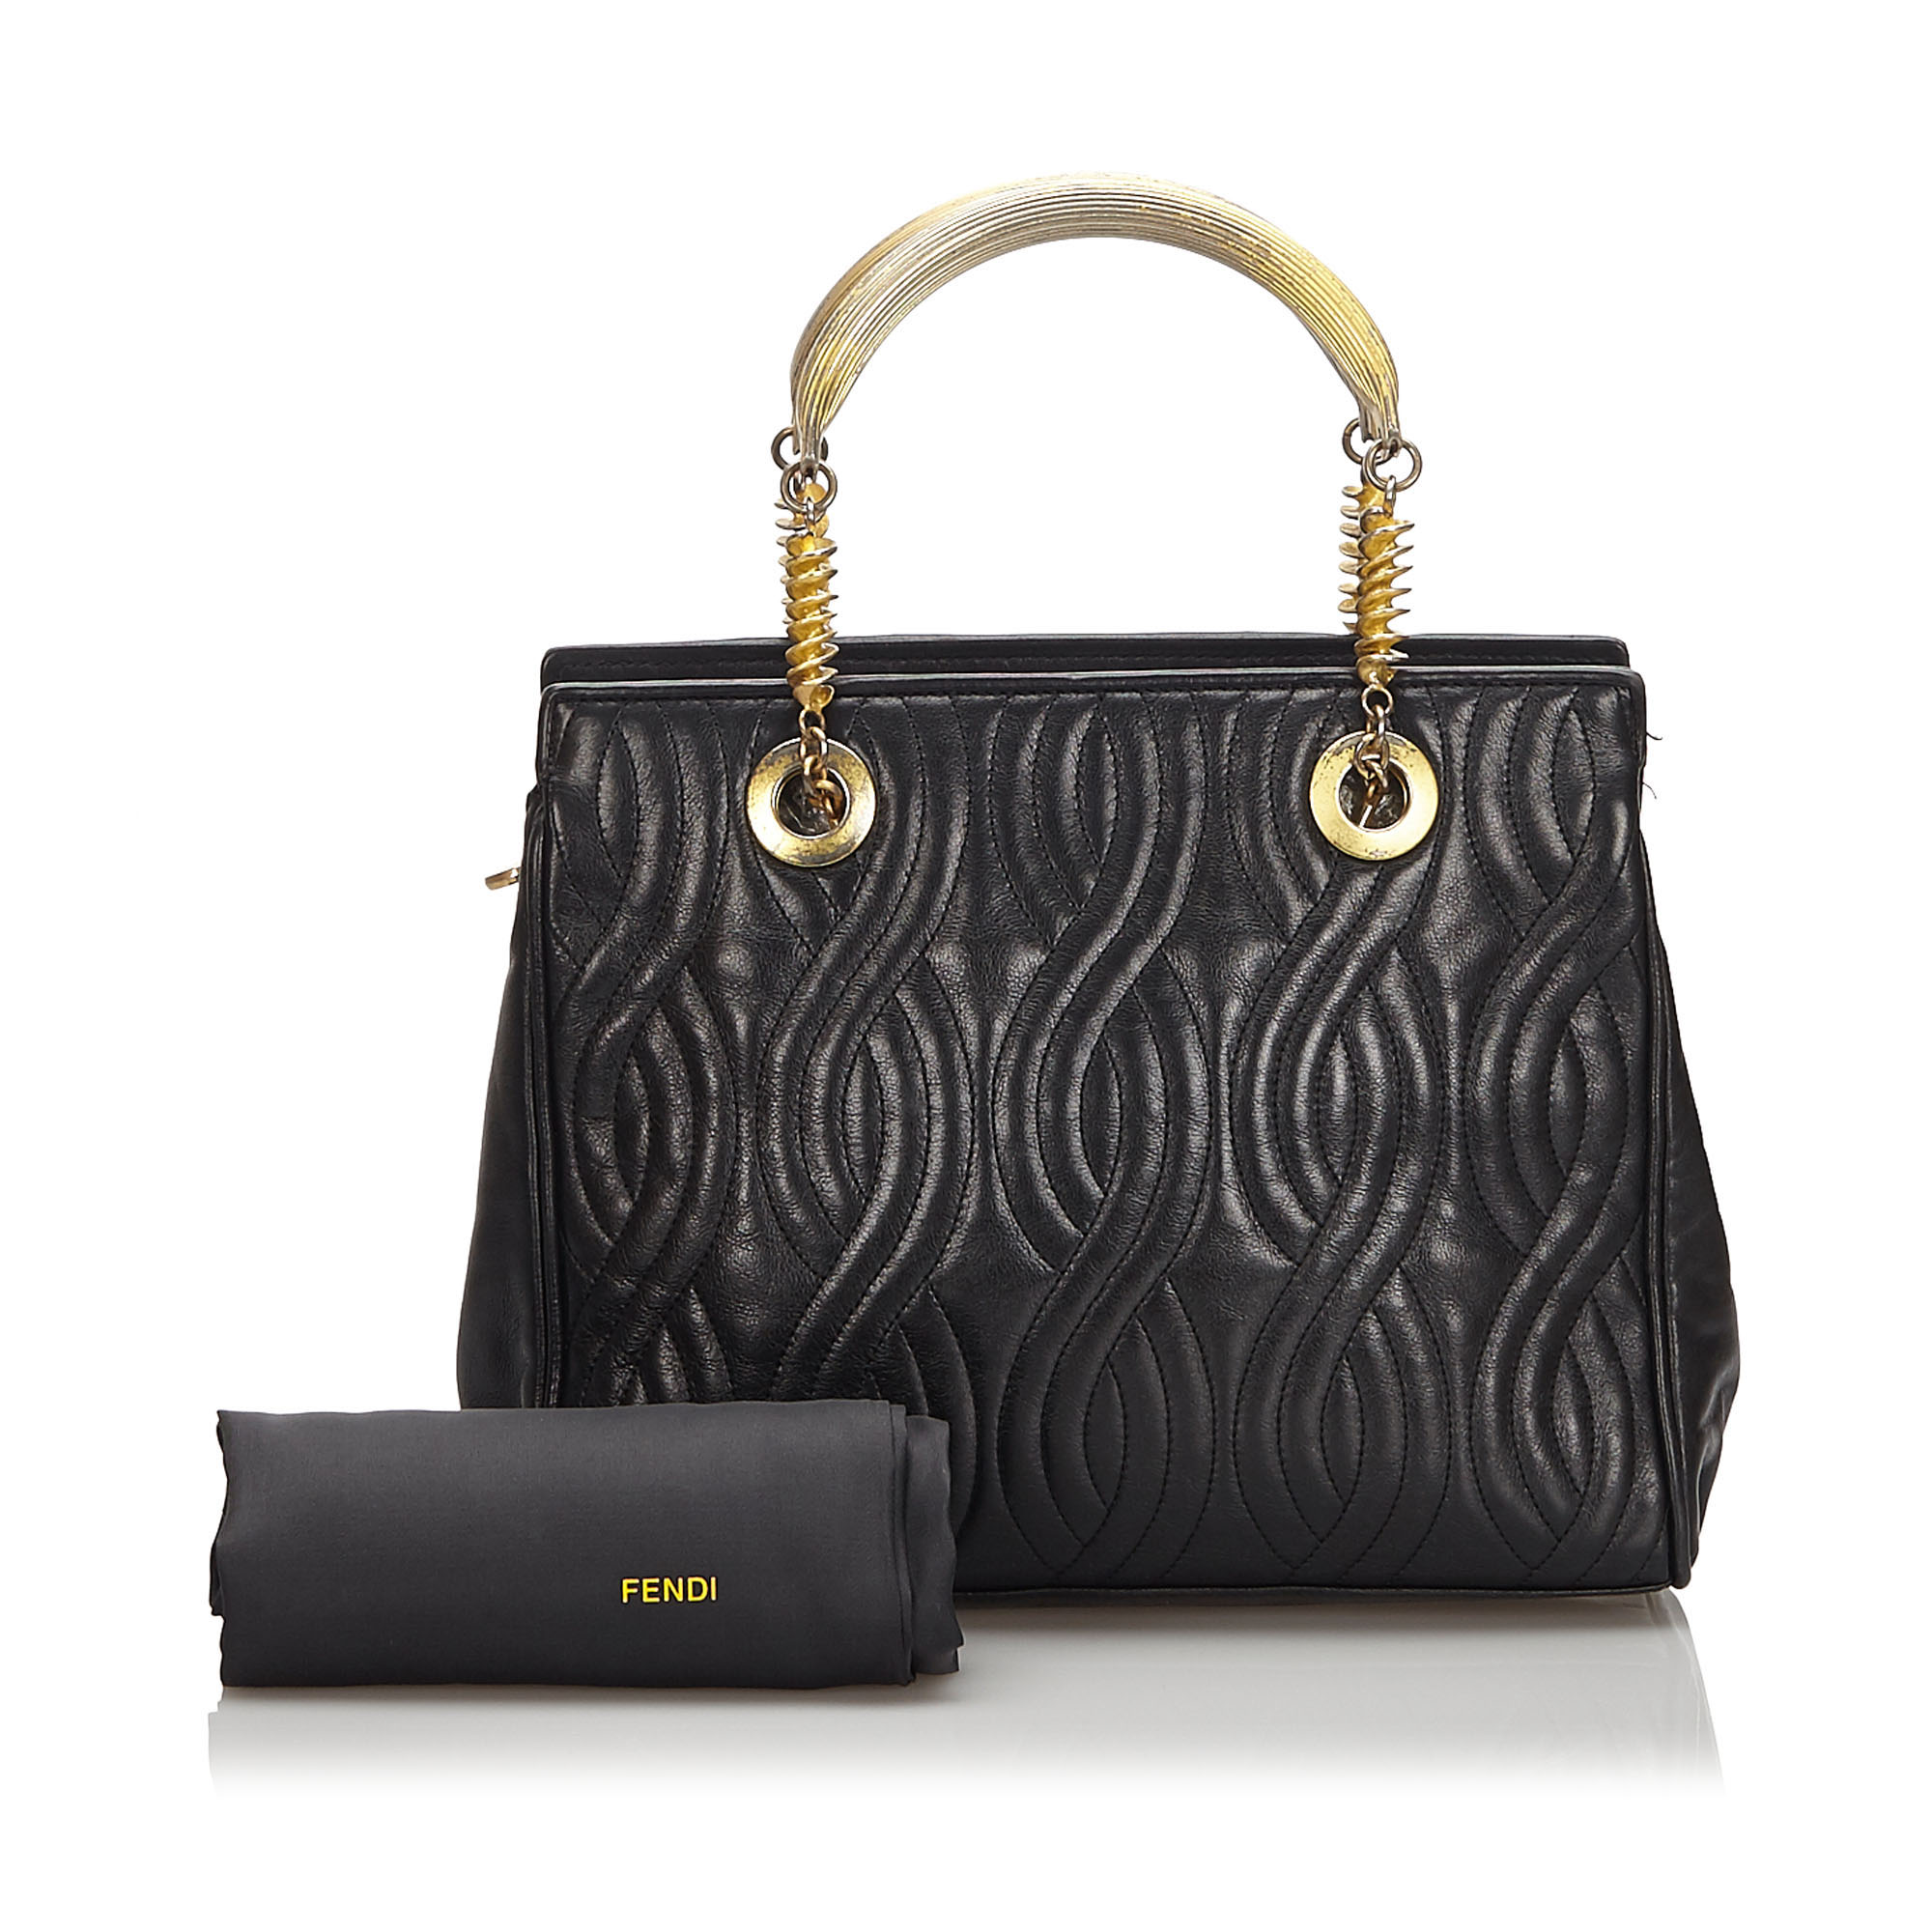 Fendi Quilted Leather Tote Bag, this tote bag features a quilted leather body, metal handles, a - Image 6 of 11